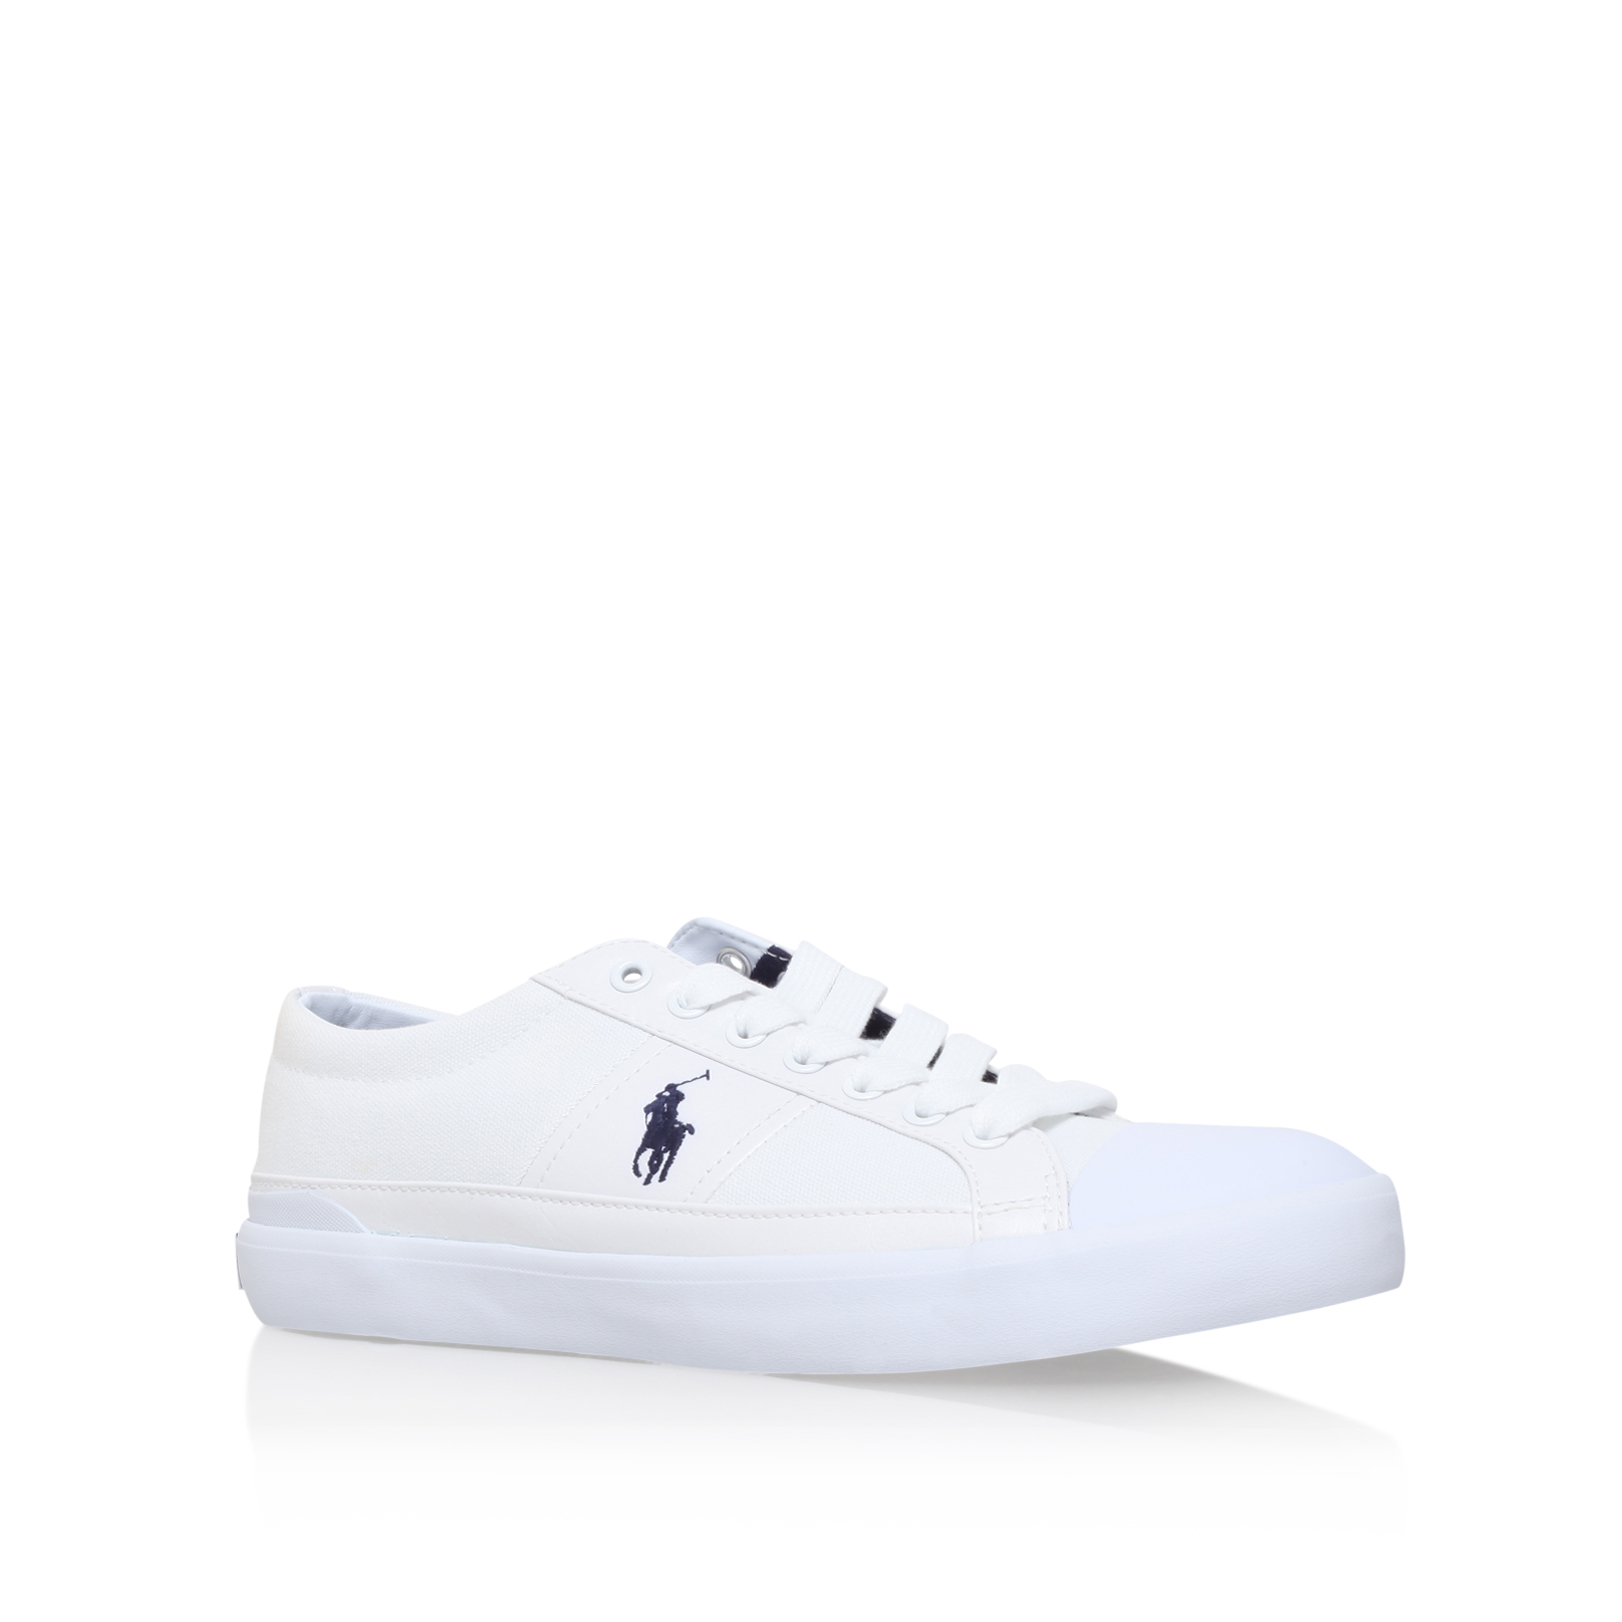 White Flat Sneakers by POLO RALPH LAUREN